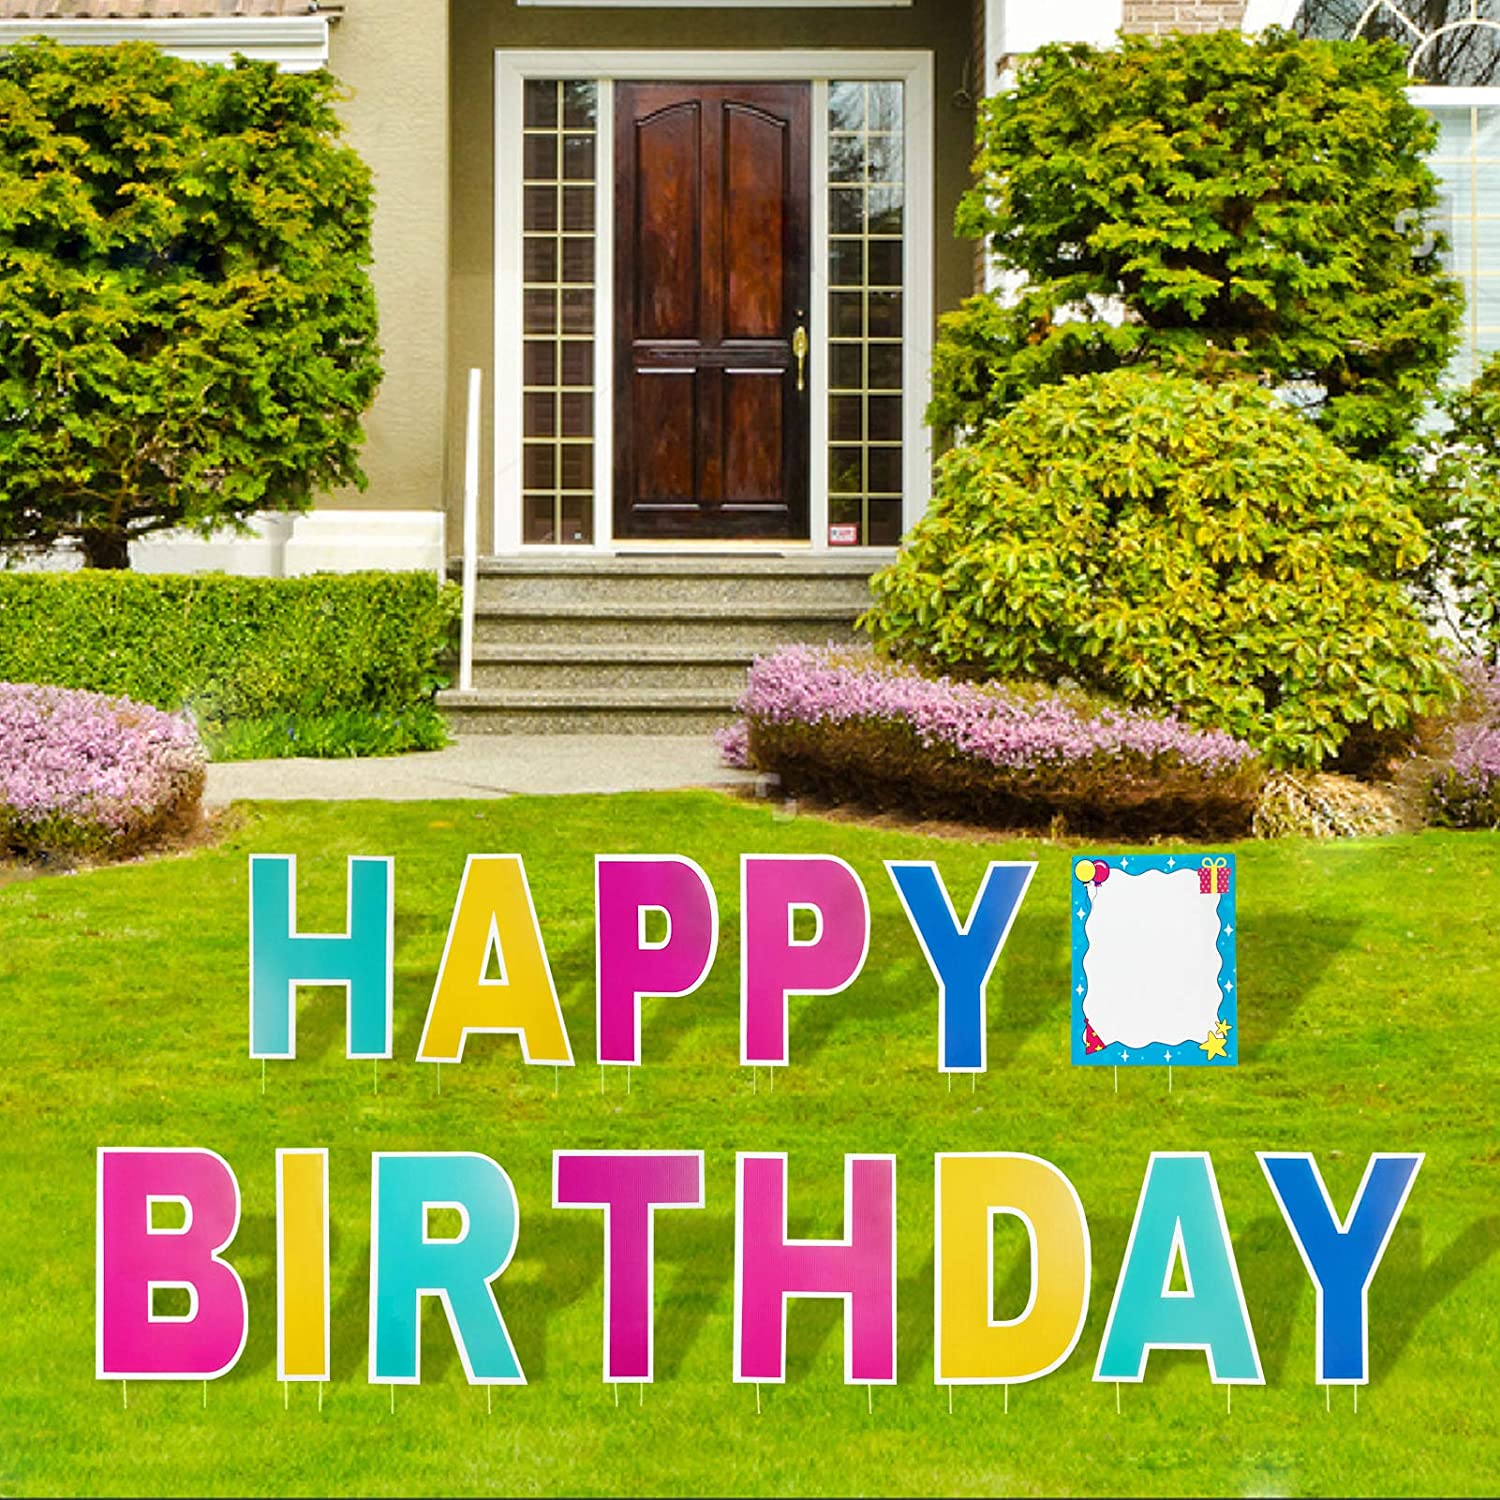 Top Suppliers Outdoor Garden Ornaments - Happy Birthday Yard Sign 16 Inch Birthday Letters Lawn Sign Colorful Birthday Yard Decoration with Stakes Cake Balloon Waterproof Garden Lawn Decor for Out...